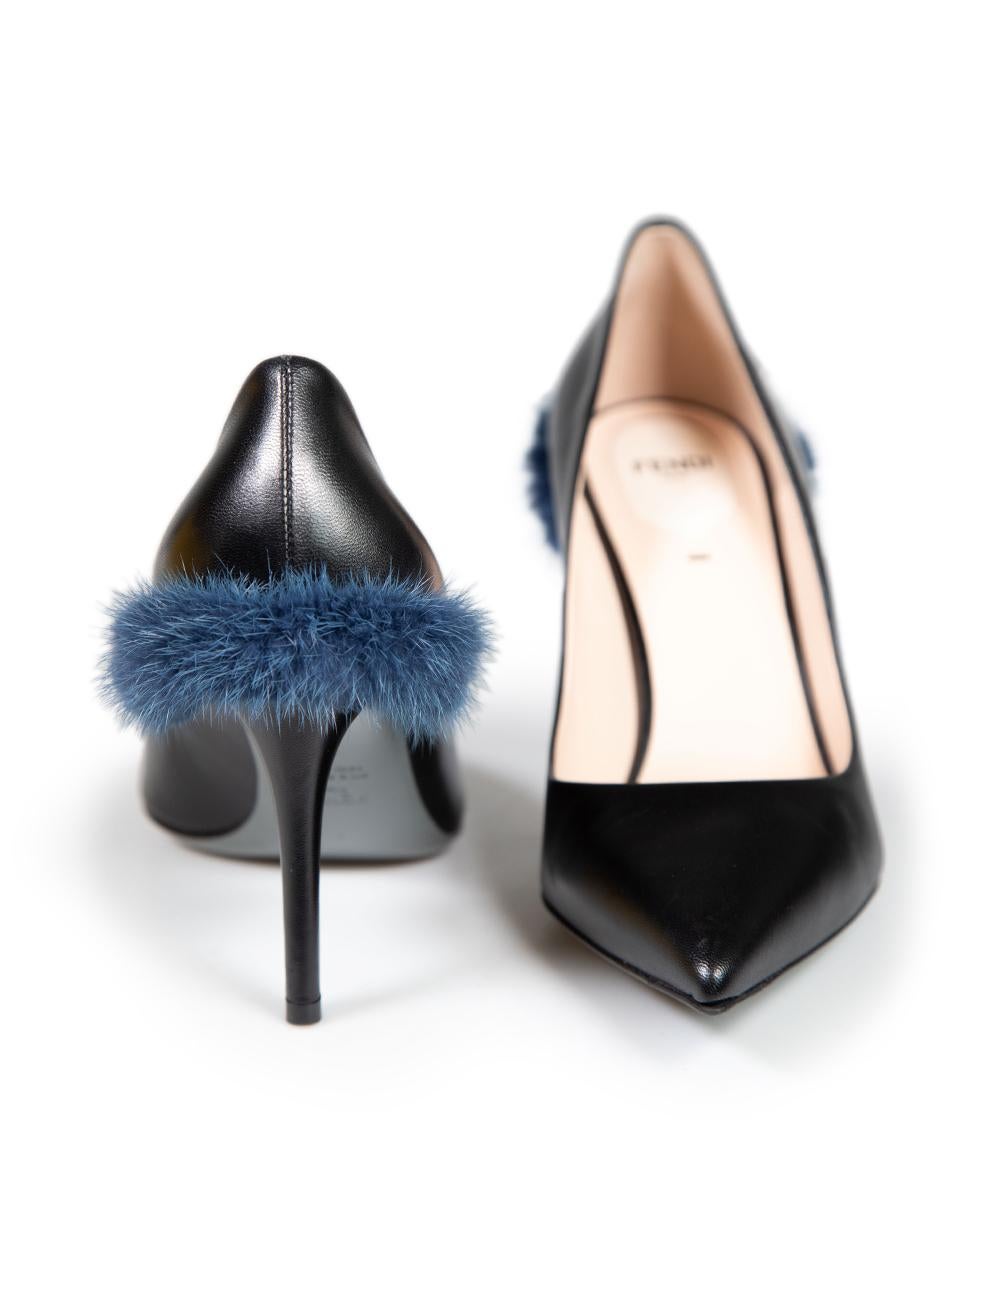 Fendi Black Leather Fur Trimmed Pointed Toe Heels Size IT 40 In Excellent Condition For Sale In London, GB